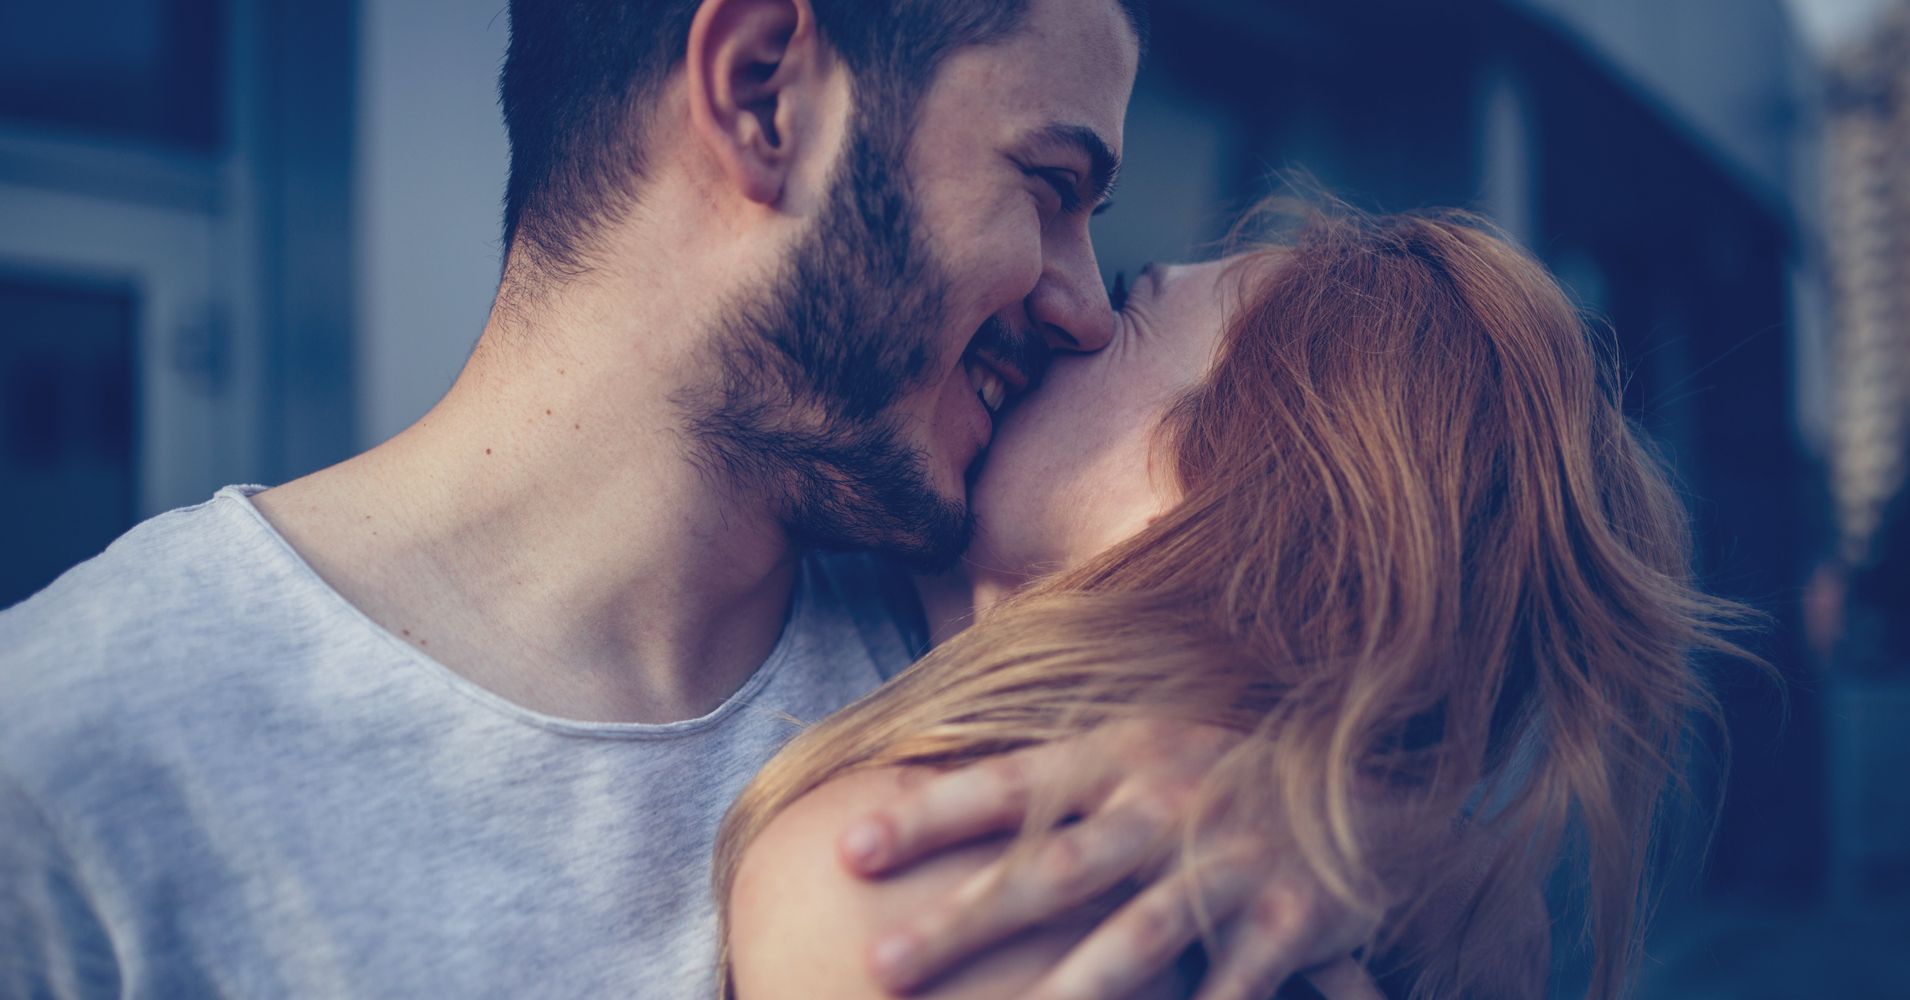 8 Underrated Qualities To Look For In A Spouse According To Experts 